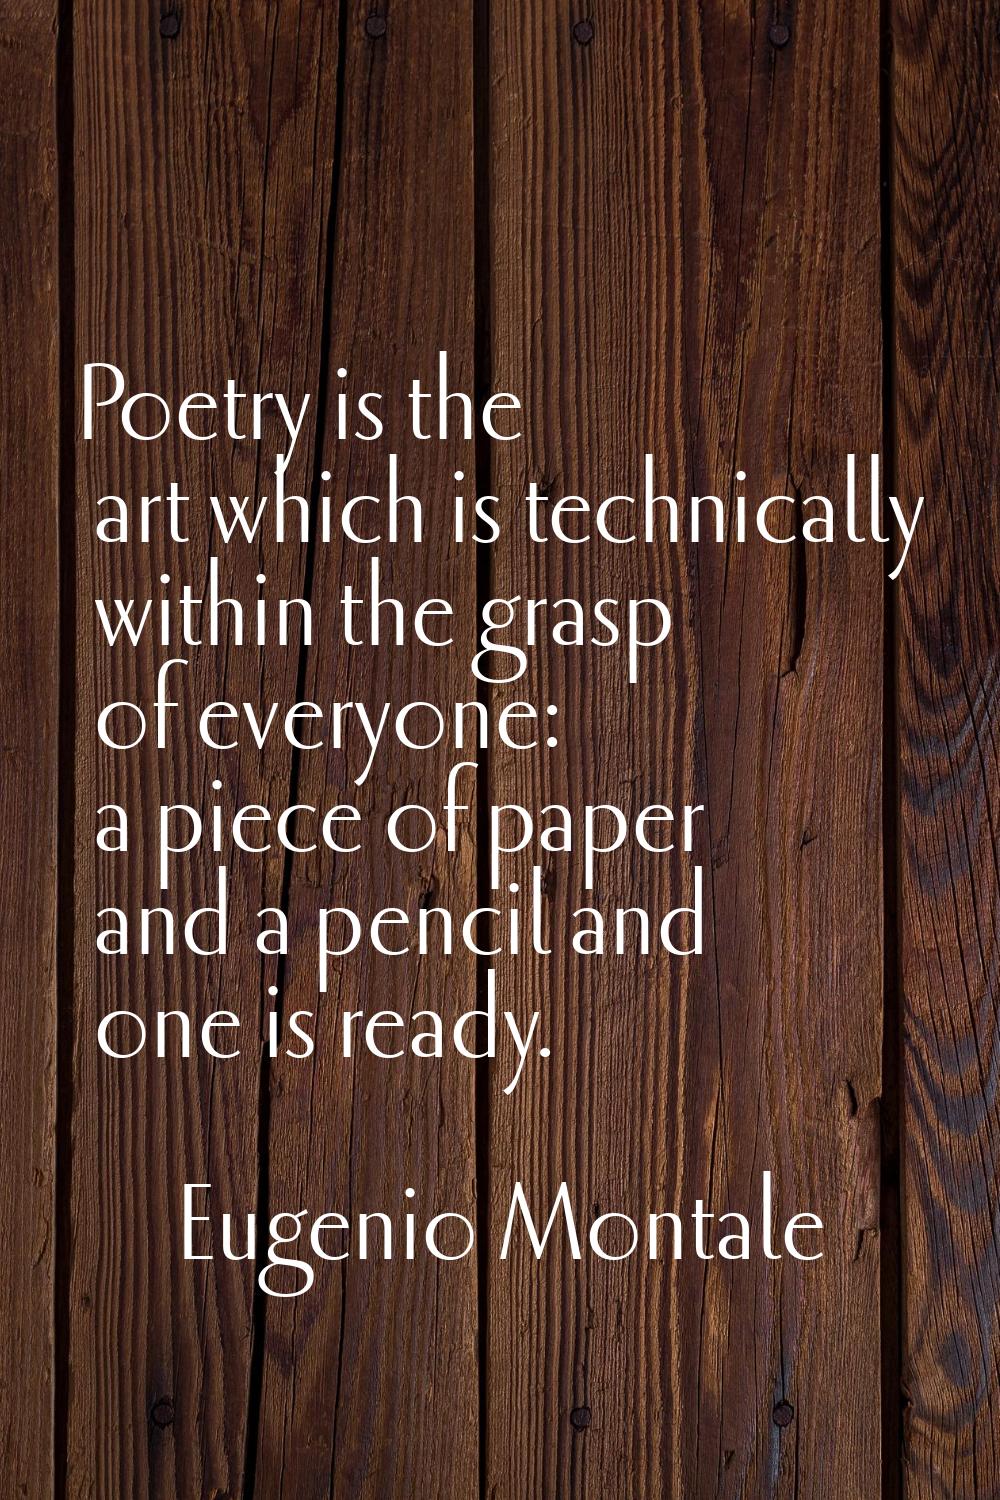 Poetry is the art which is technically within the grasp of everyone: a piece of paper and a pencil 